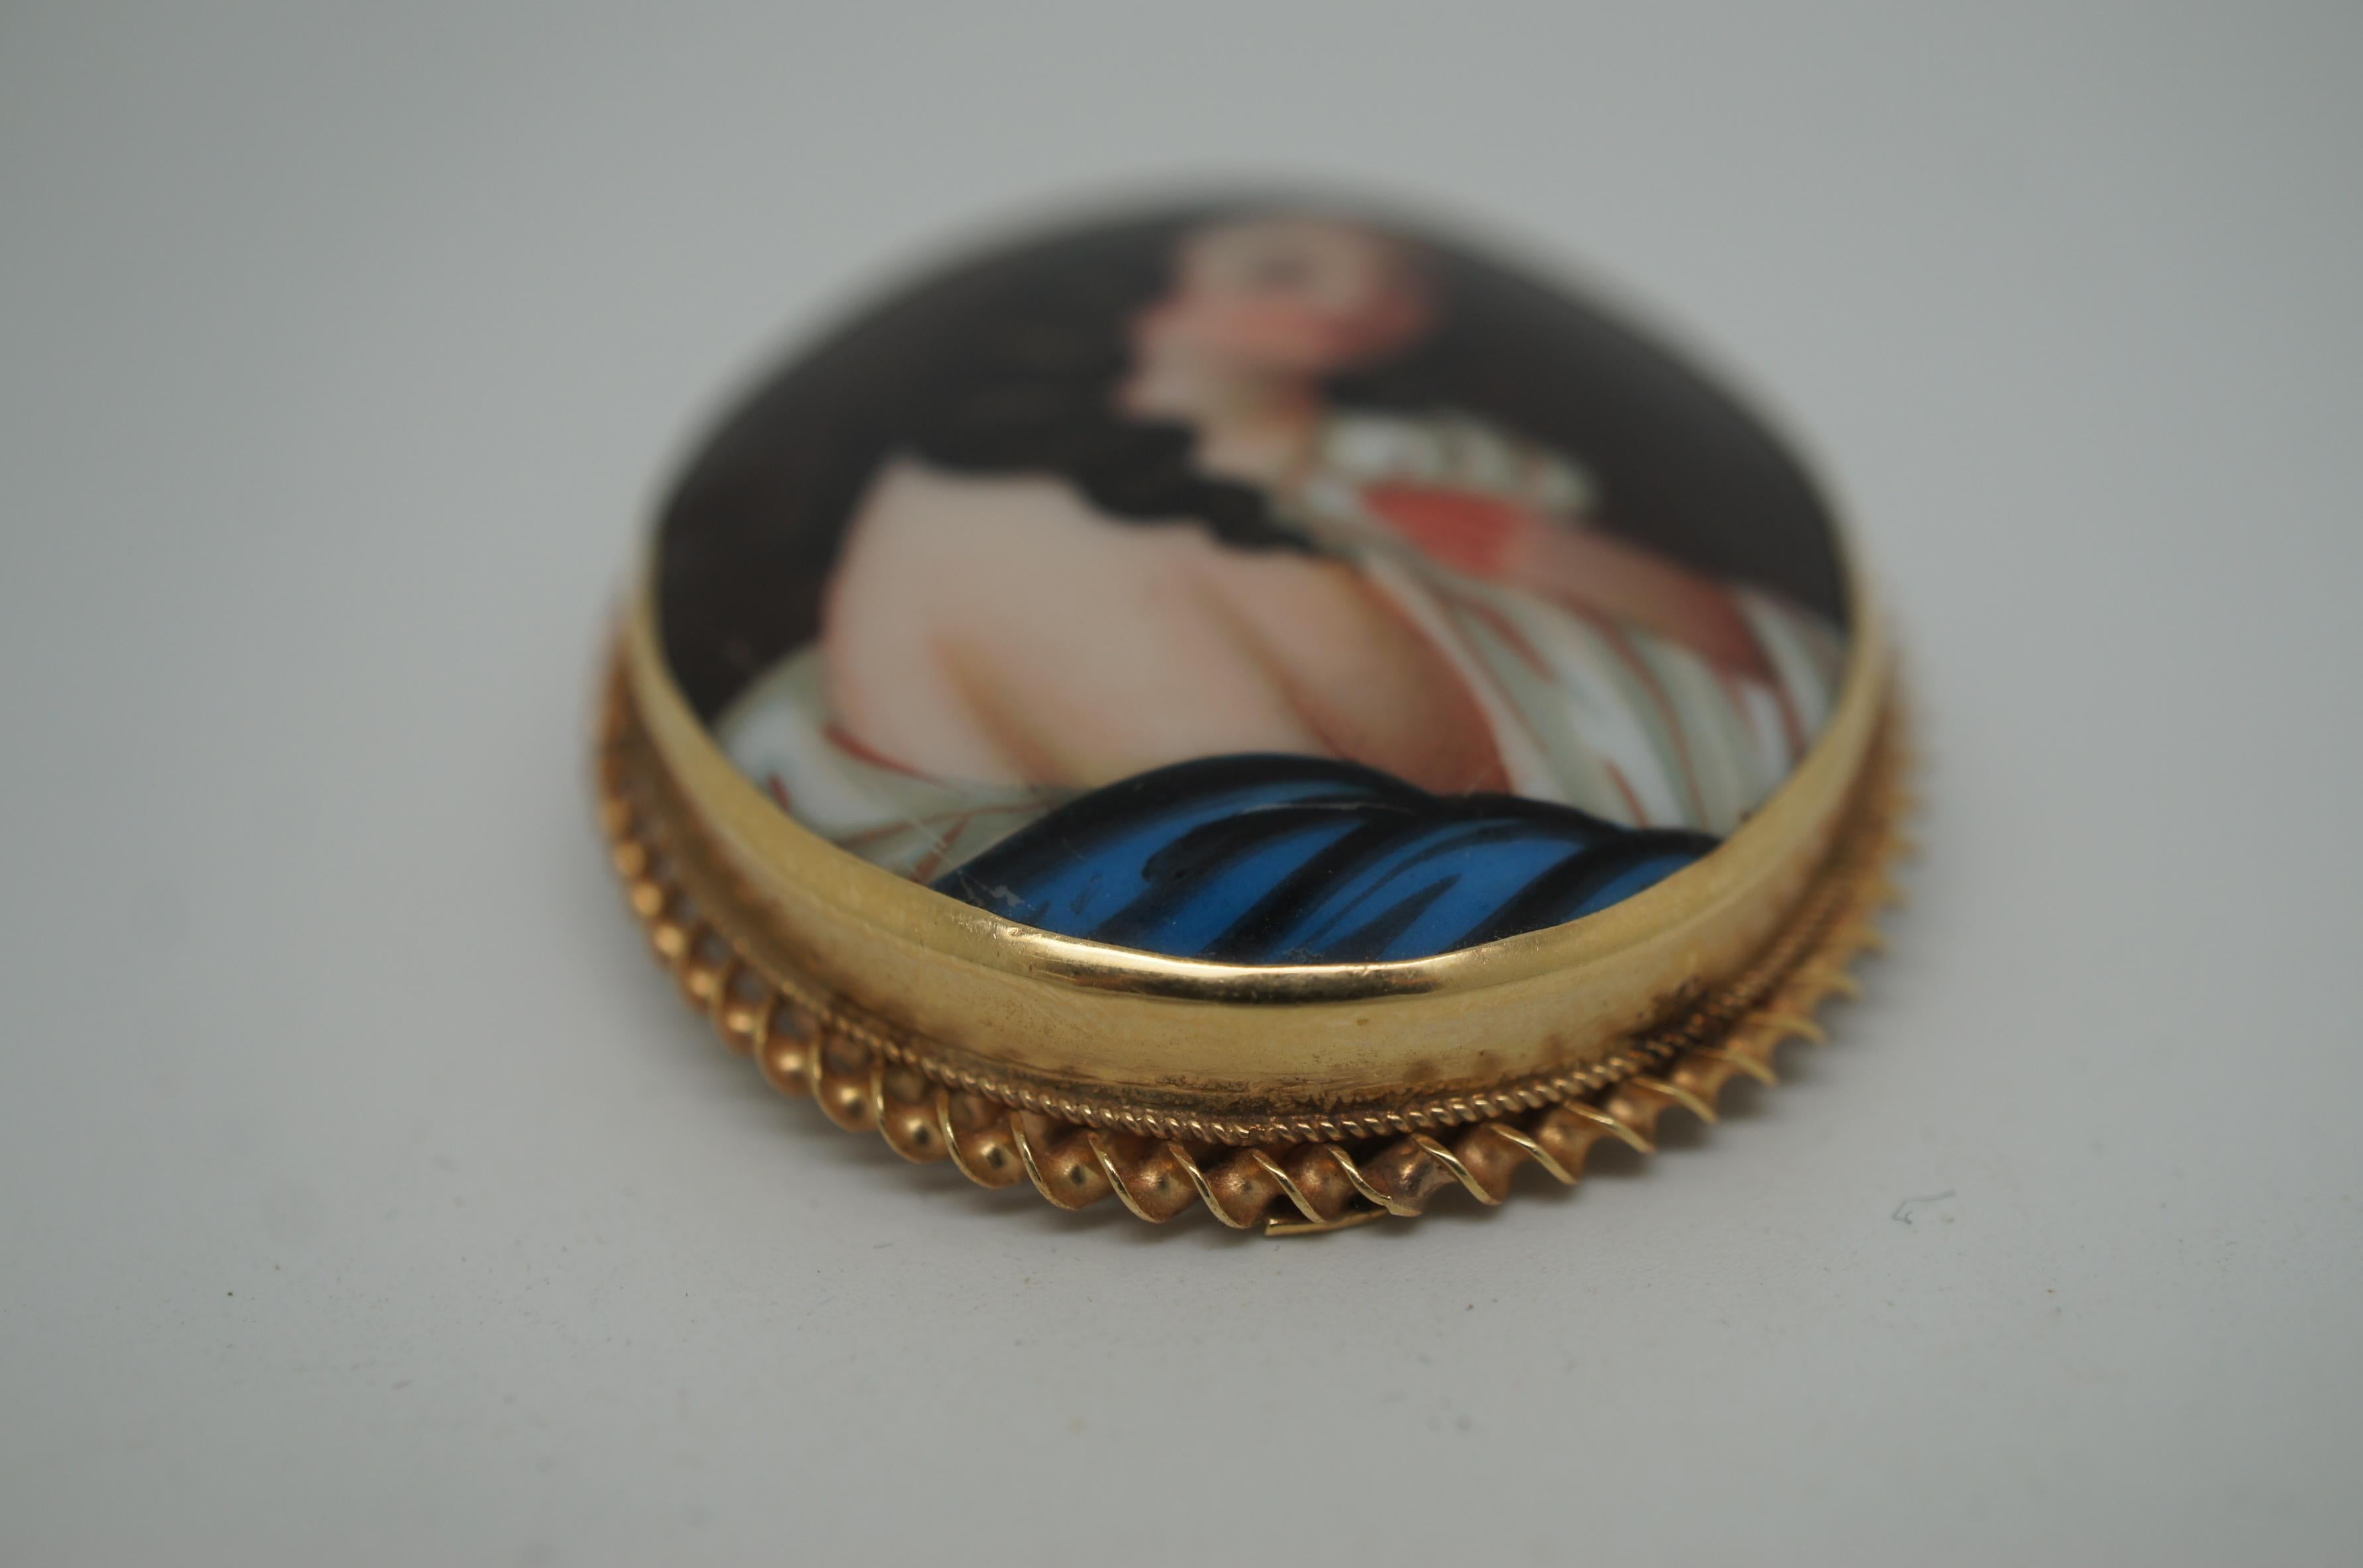 14-Karat Yellow Gold Hand Painted Porcelain Cameo Portrait Brooch Pendant In Good Condition For Sale In Dayton, OH